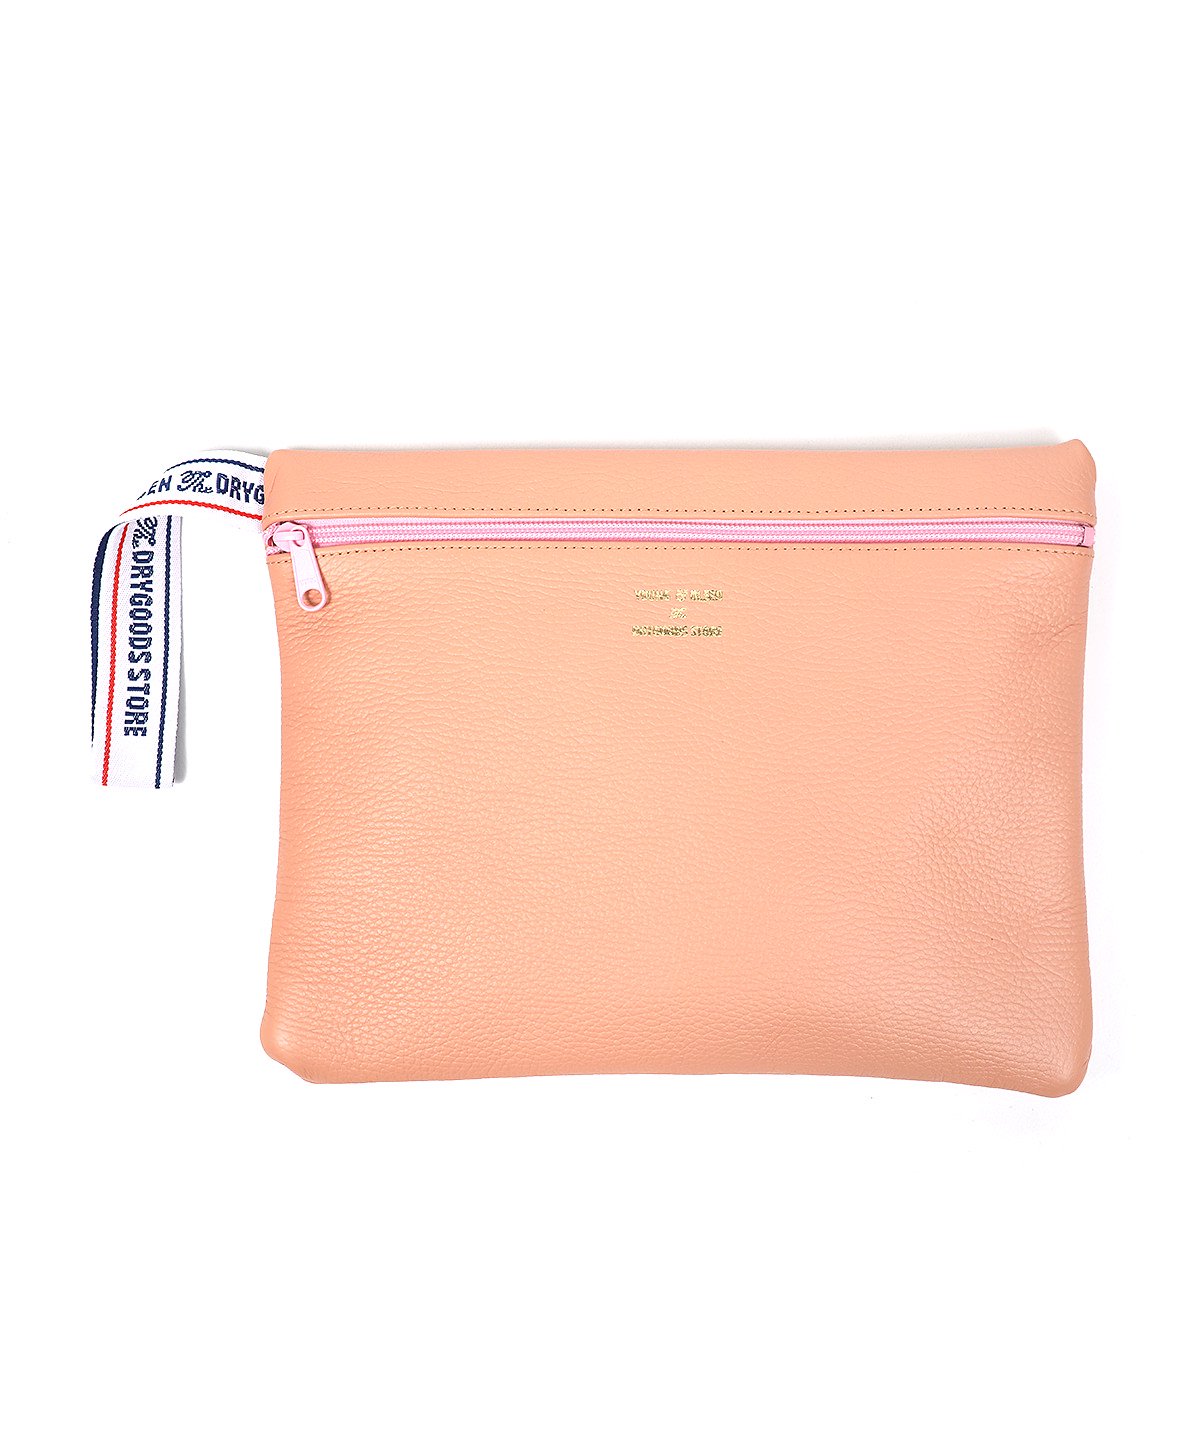 Y&O LEATHER POUCH L